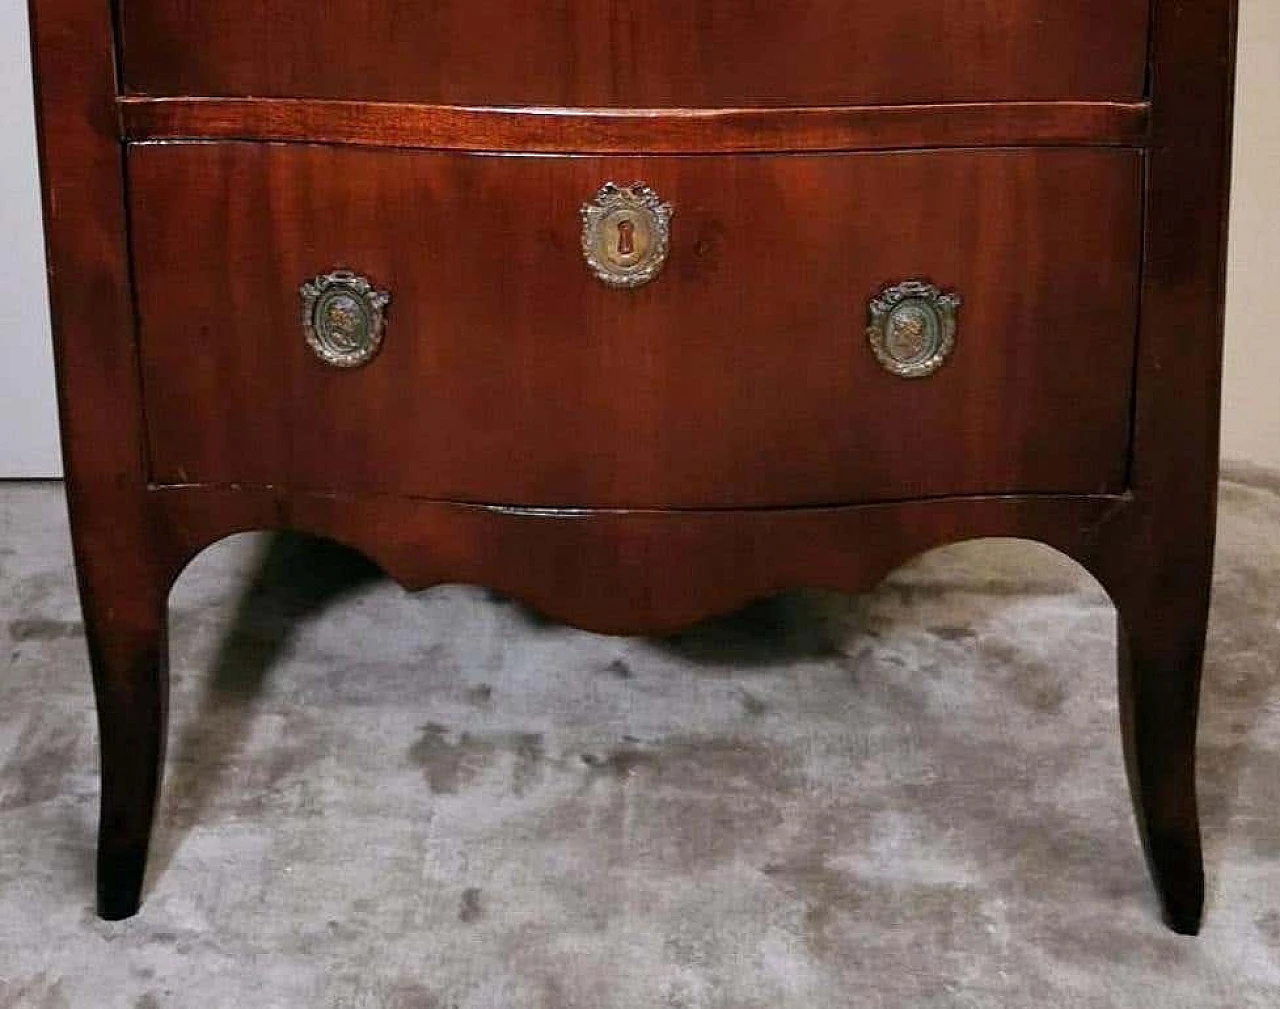 Neoclassical style chest of drawers in mahogany with bronze decorations, 18th century 1332973